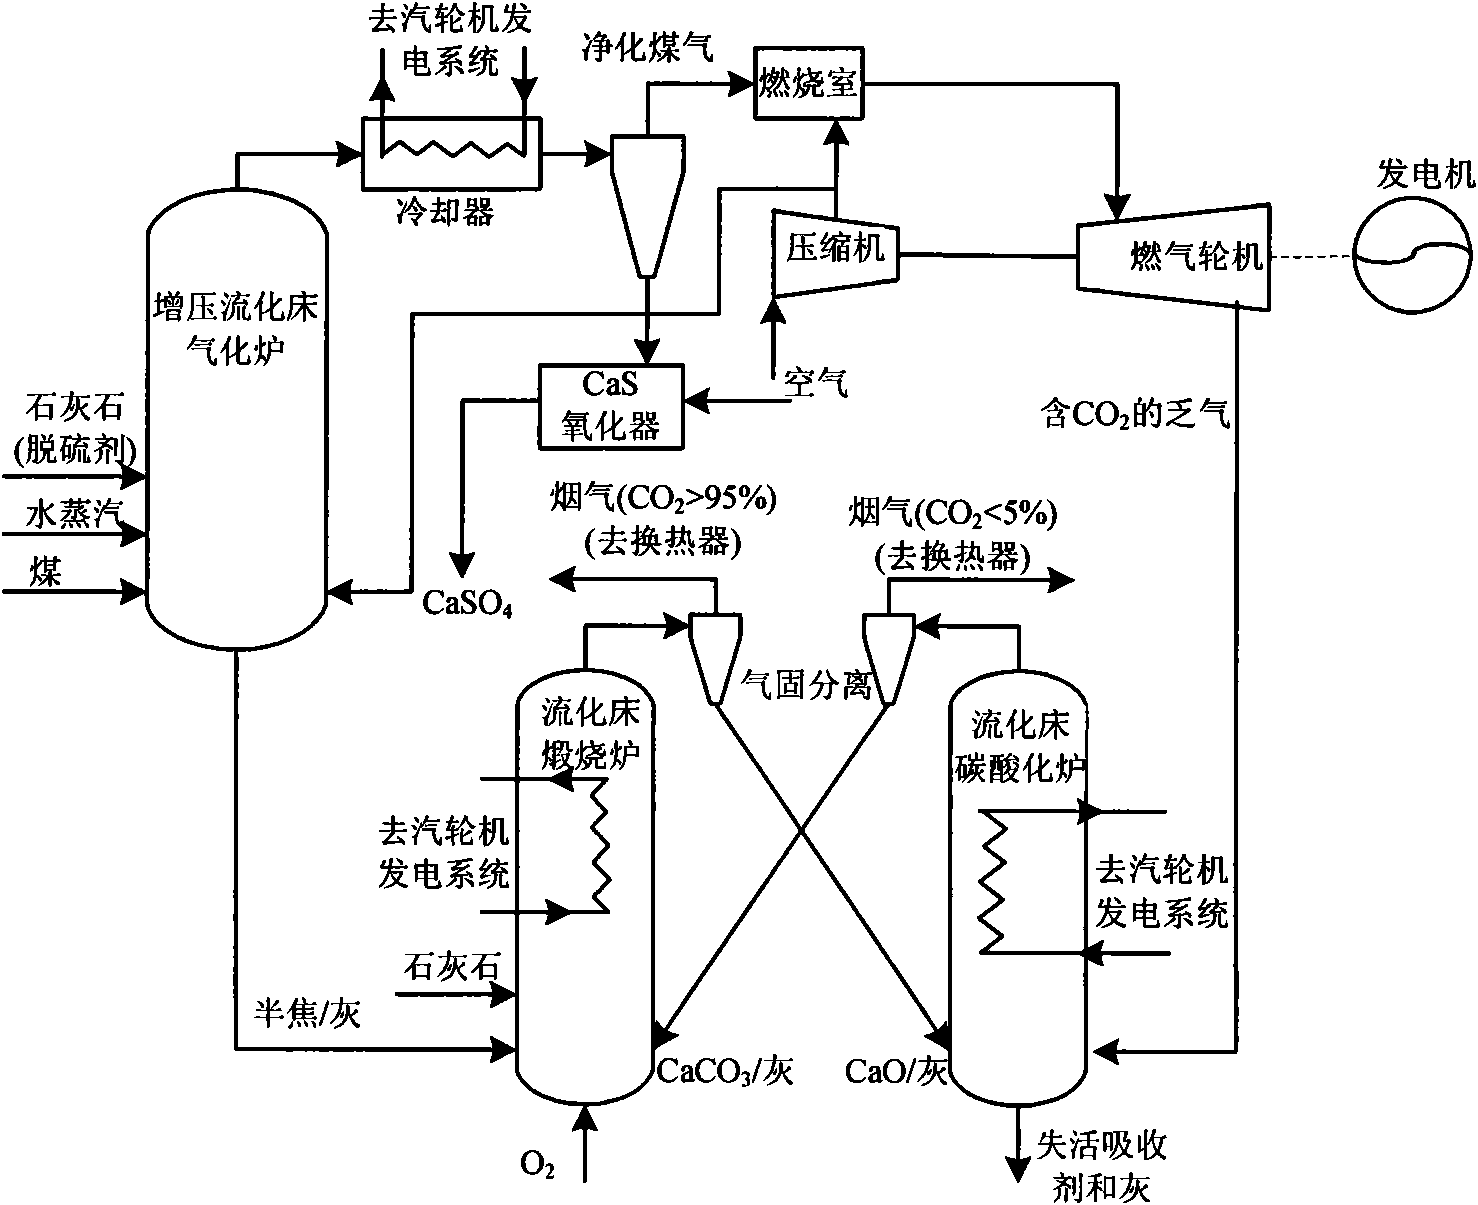 Method for catching carbon dioxide by pressurized fluidized bed combustion combined recycle generating system